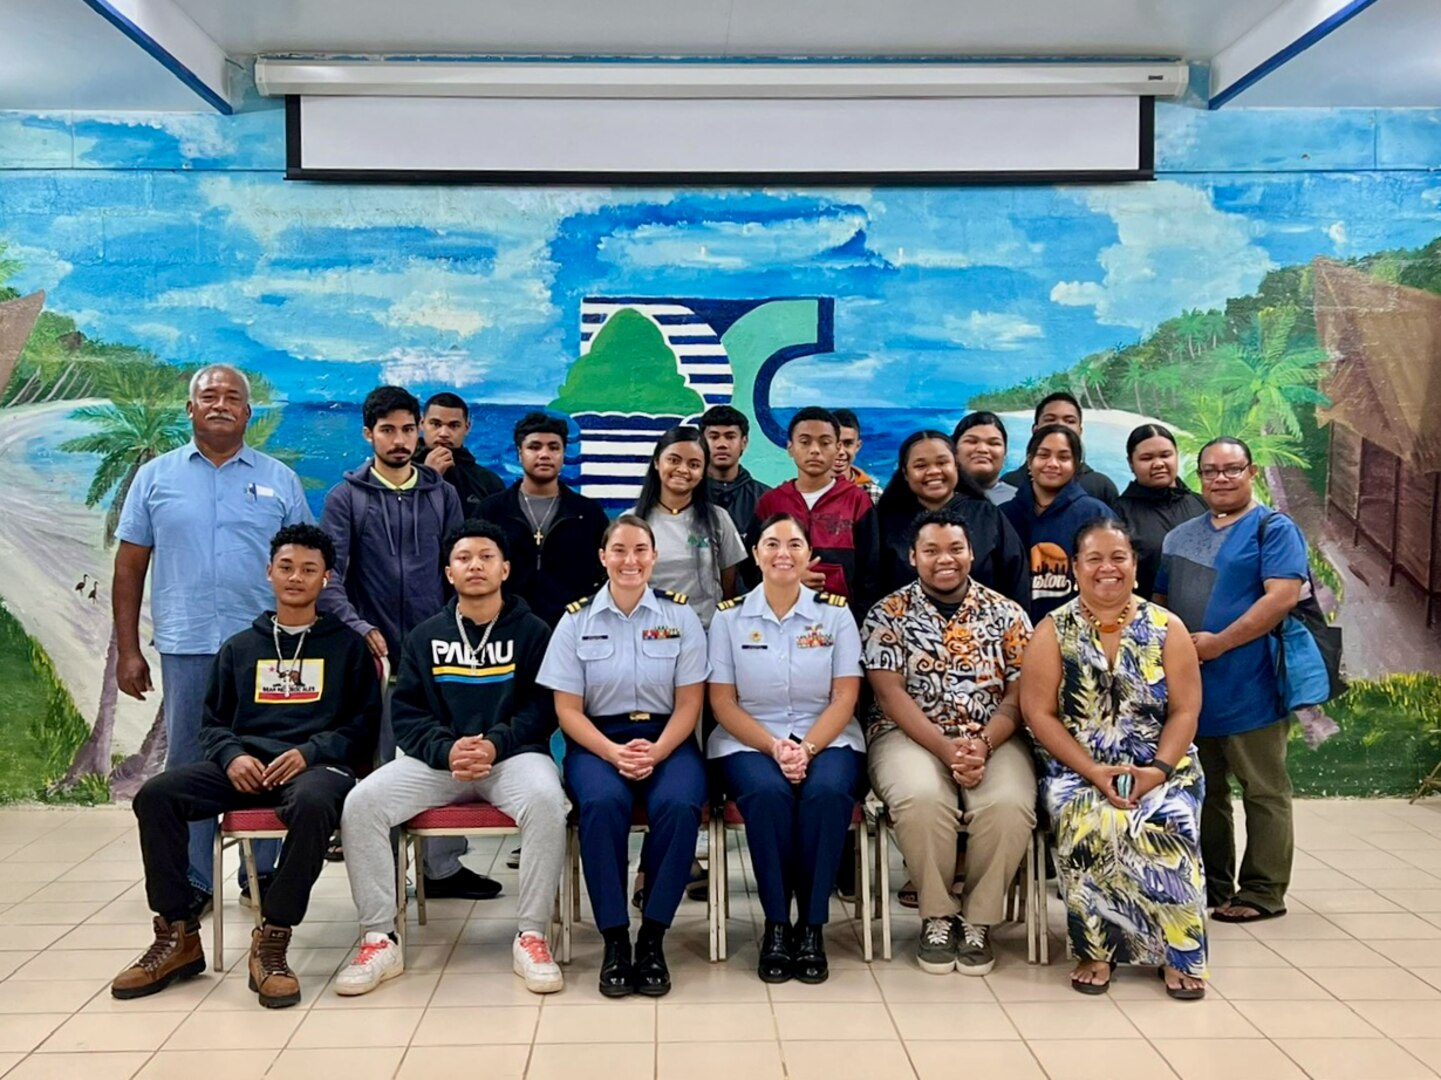 Faculty, students, and U.S. Coast Guard members take a moment for a photo at Palau Community College in Koror, Palau, in November 2023. In an enduring commitment to regional stability and cooperative security, U.S. Coast Guard Forces Micronesia/Sector Guam personnel participated in a bilateral Joint Committee Meeting (JCM) with the Republic of Palau, alongside U.S. Indo-Pacific Command (INDOPACOM) and the U.S. Department of State representatives in Palau from Nov. 14-17, 2023. (U.S. Coast Guard photo)